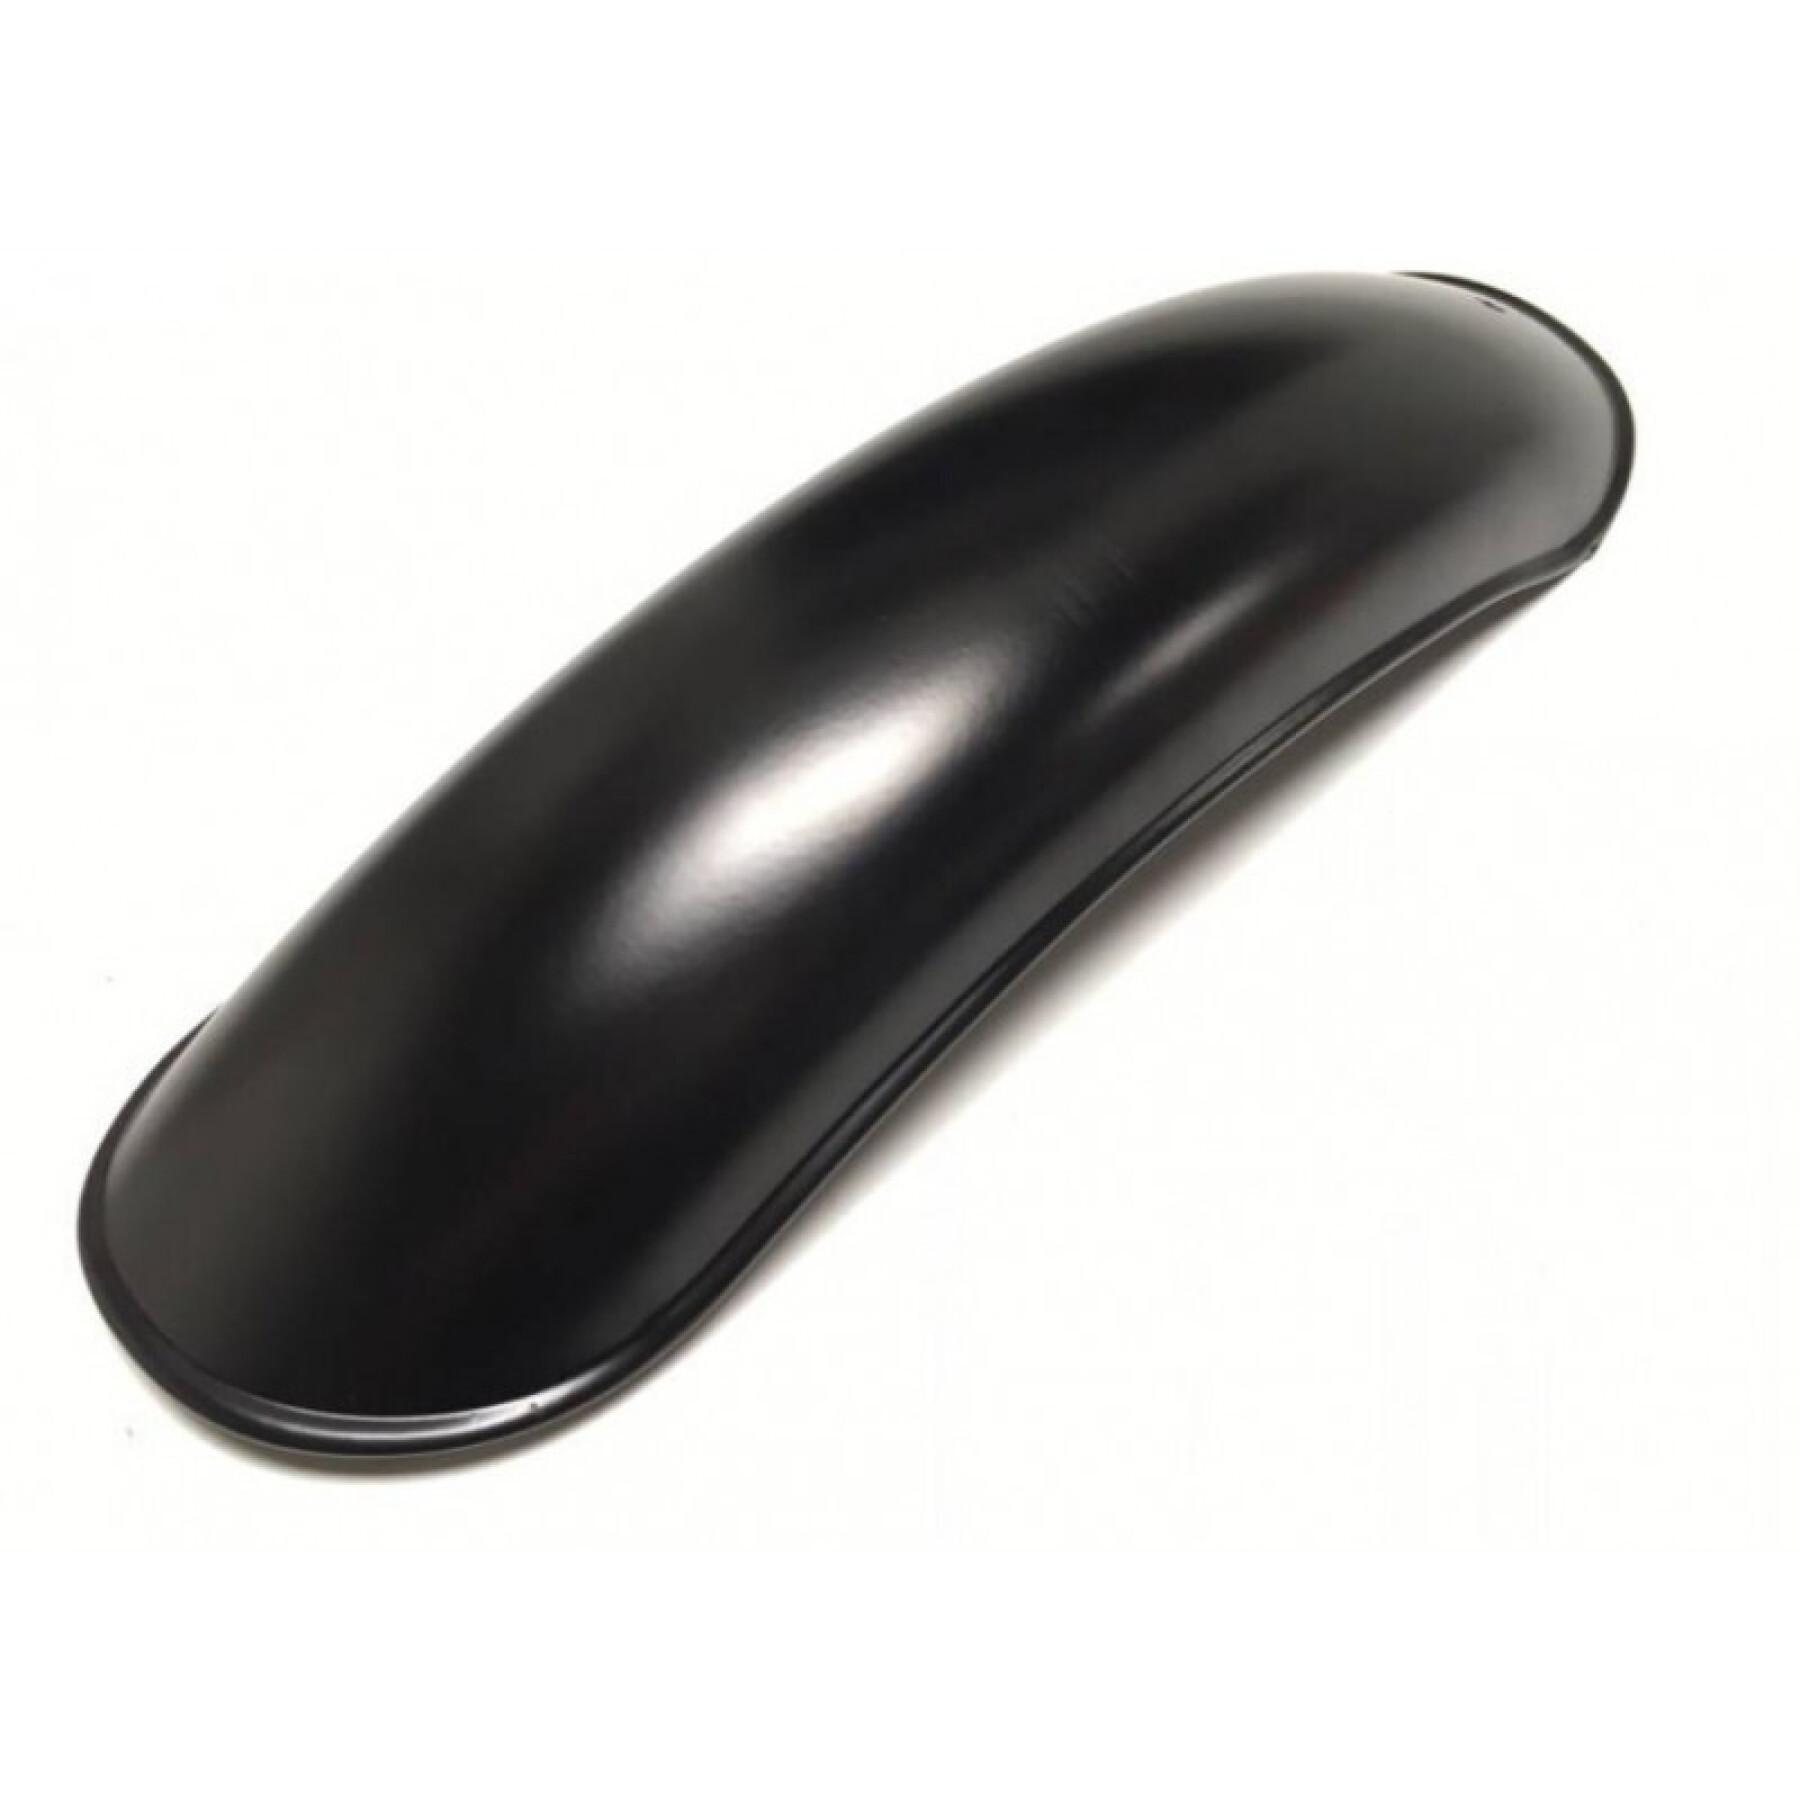 Universal front mudguard 17/18 inches type 6 Brazoline